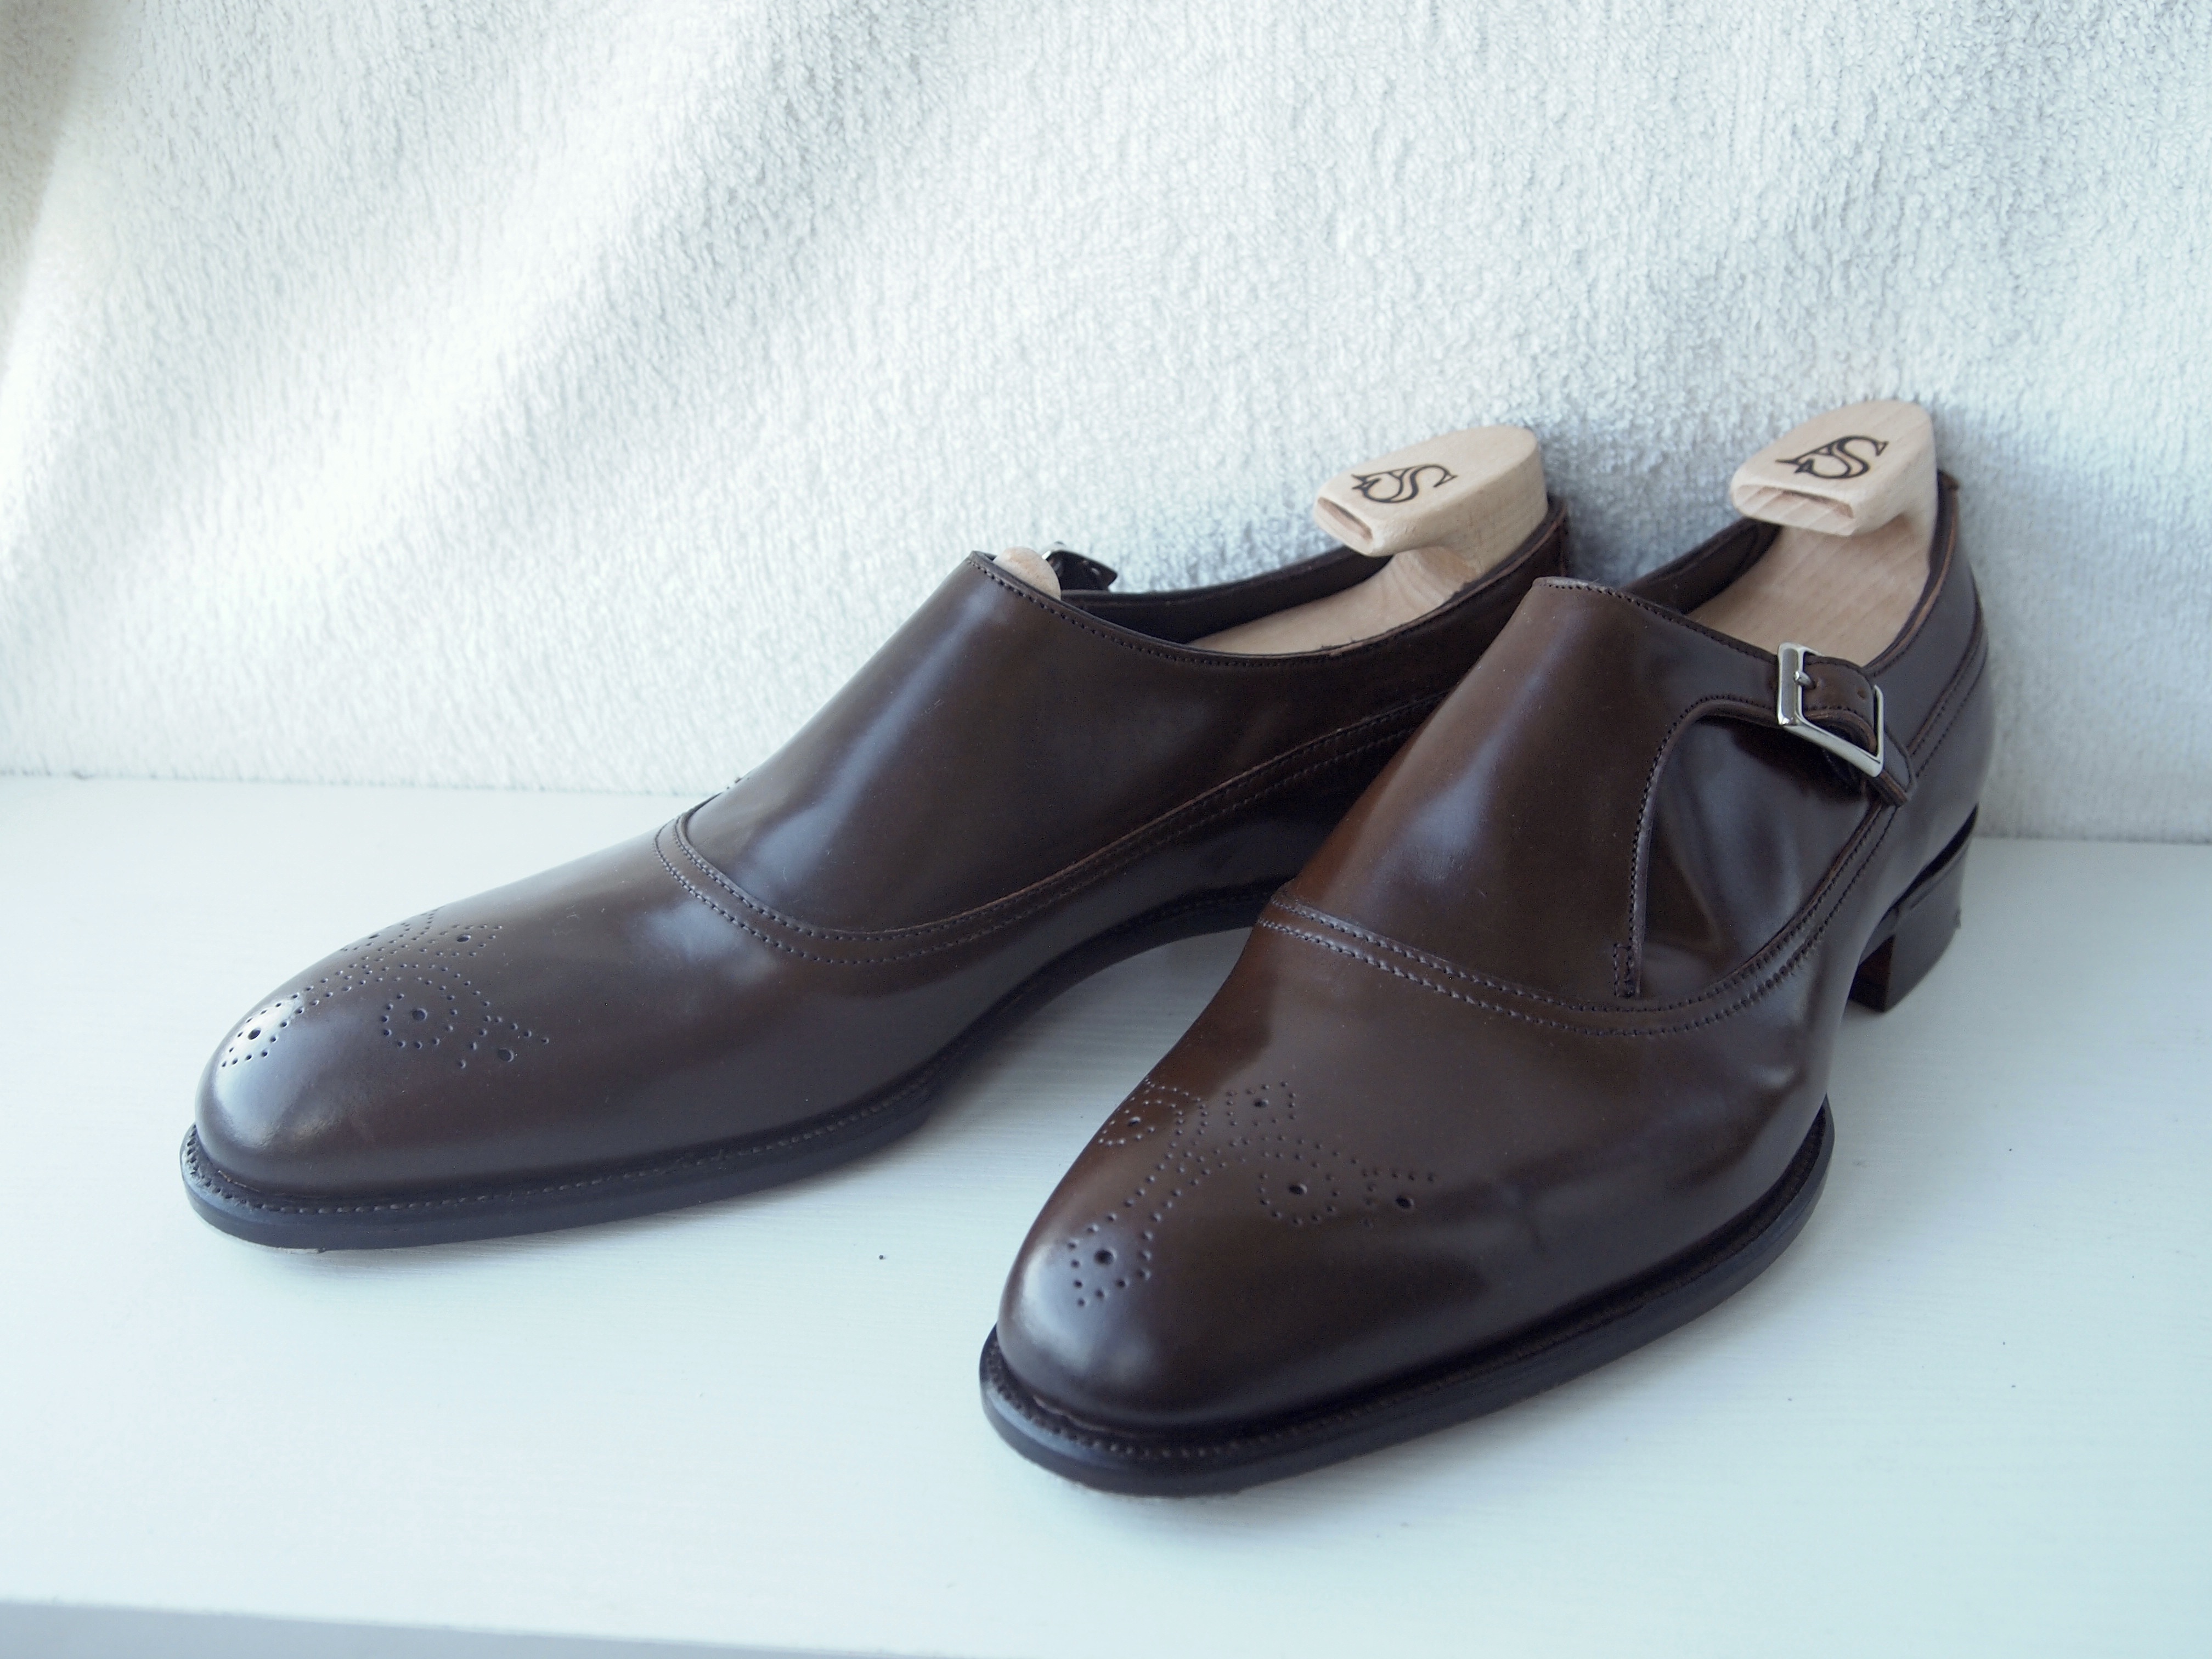 A Fine Pair of Shoes x Alfred Sargent MTO Thread | Page 62 | Styleforum